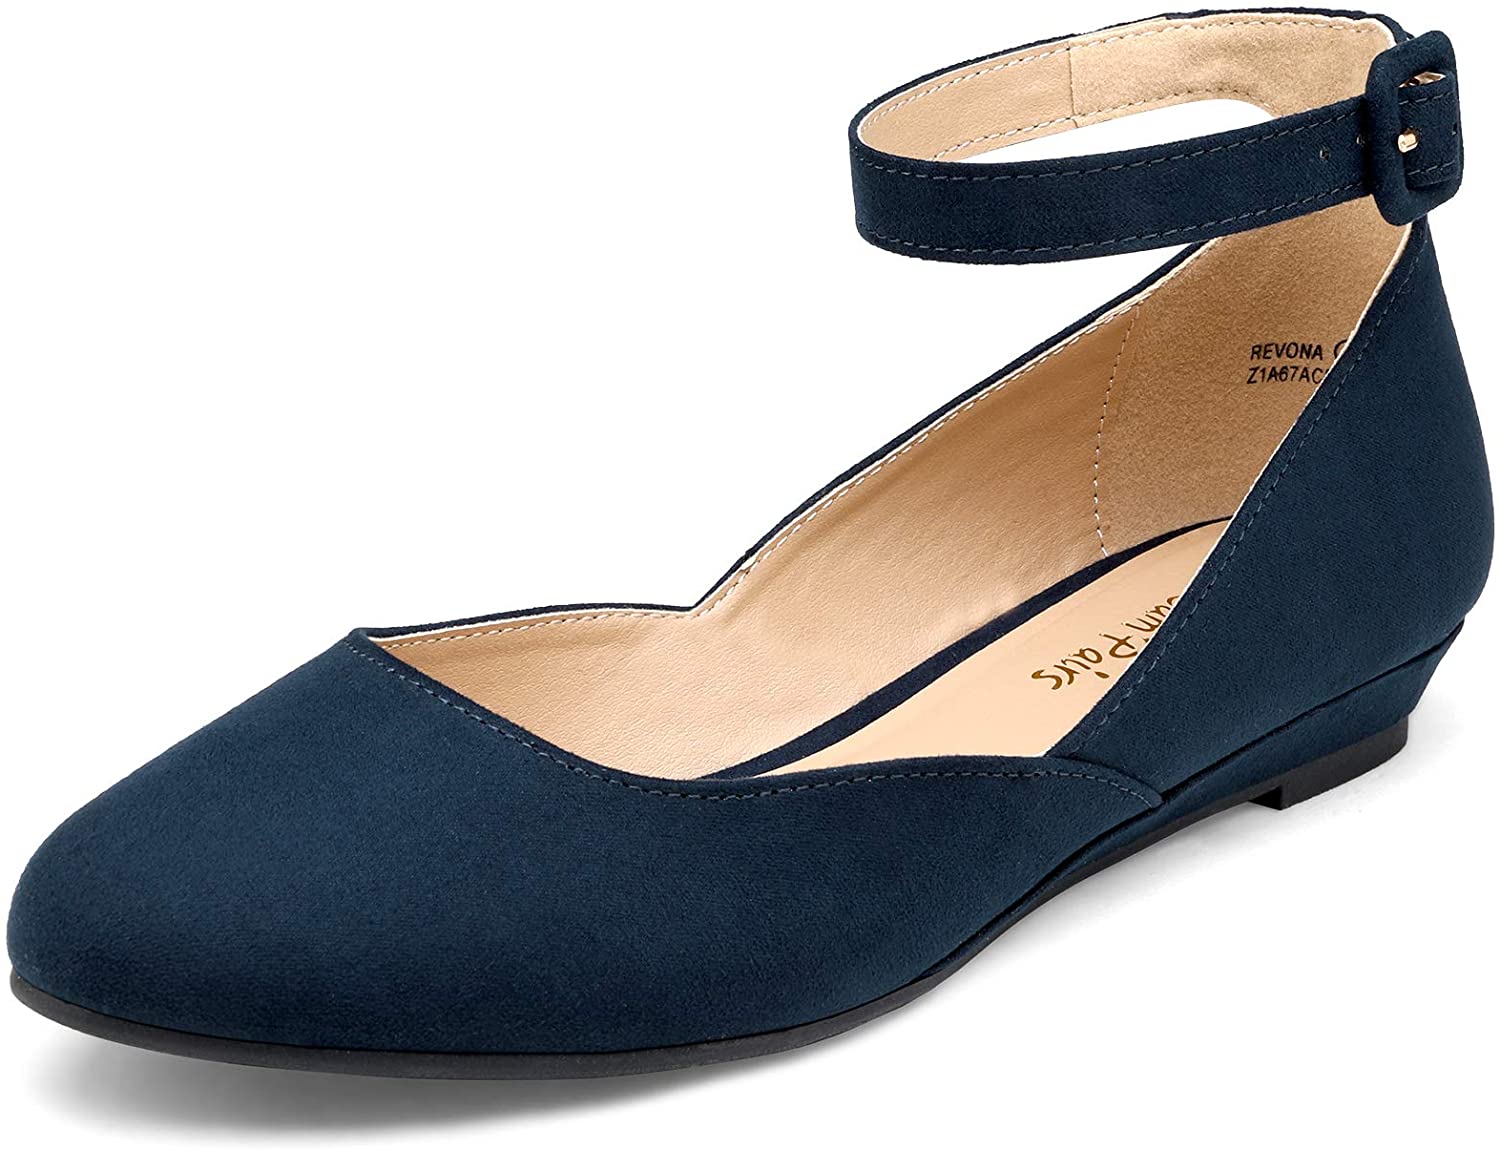 DREAM PAIRS Women's Revona Low Wedge Ankle Strap Flats, Navy Suede ...